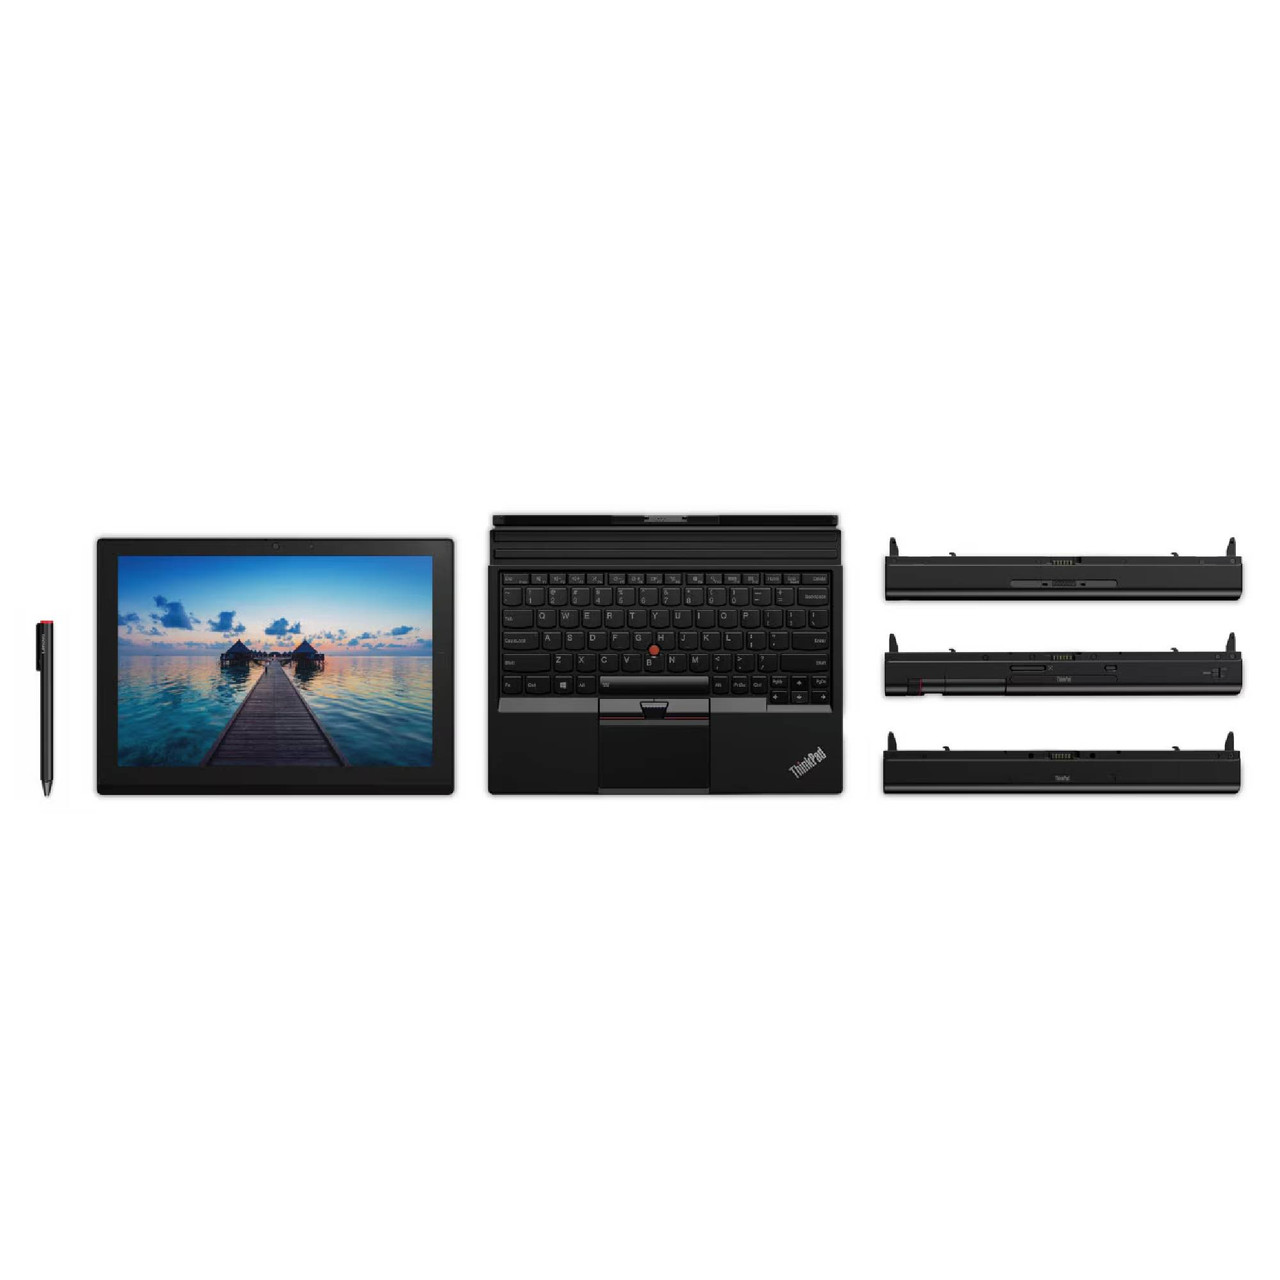 Lenovo Thinkpad X1 Tablet G1 12" Touch Laptop Core M5-6Y57 4GB 128GB SSD W10P | 20GG001VUS | Manufacturer Refurbished